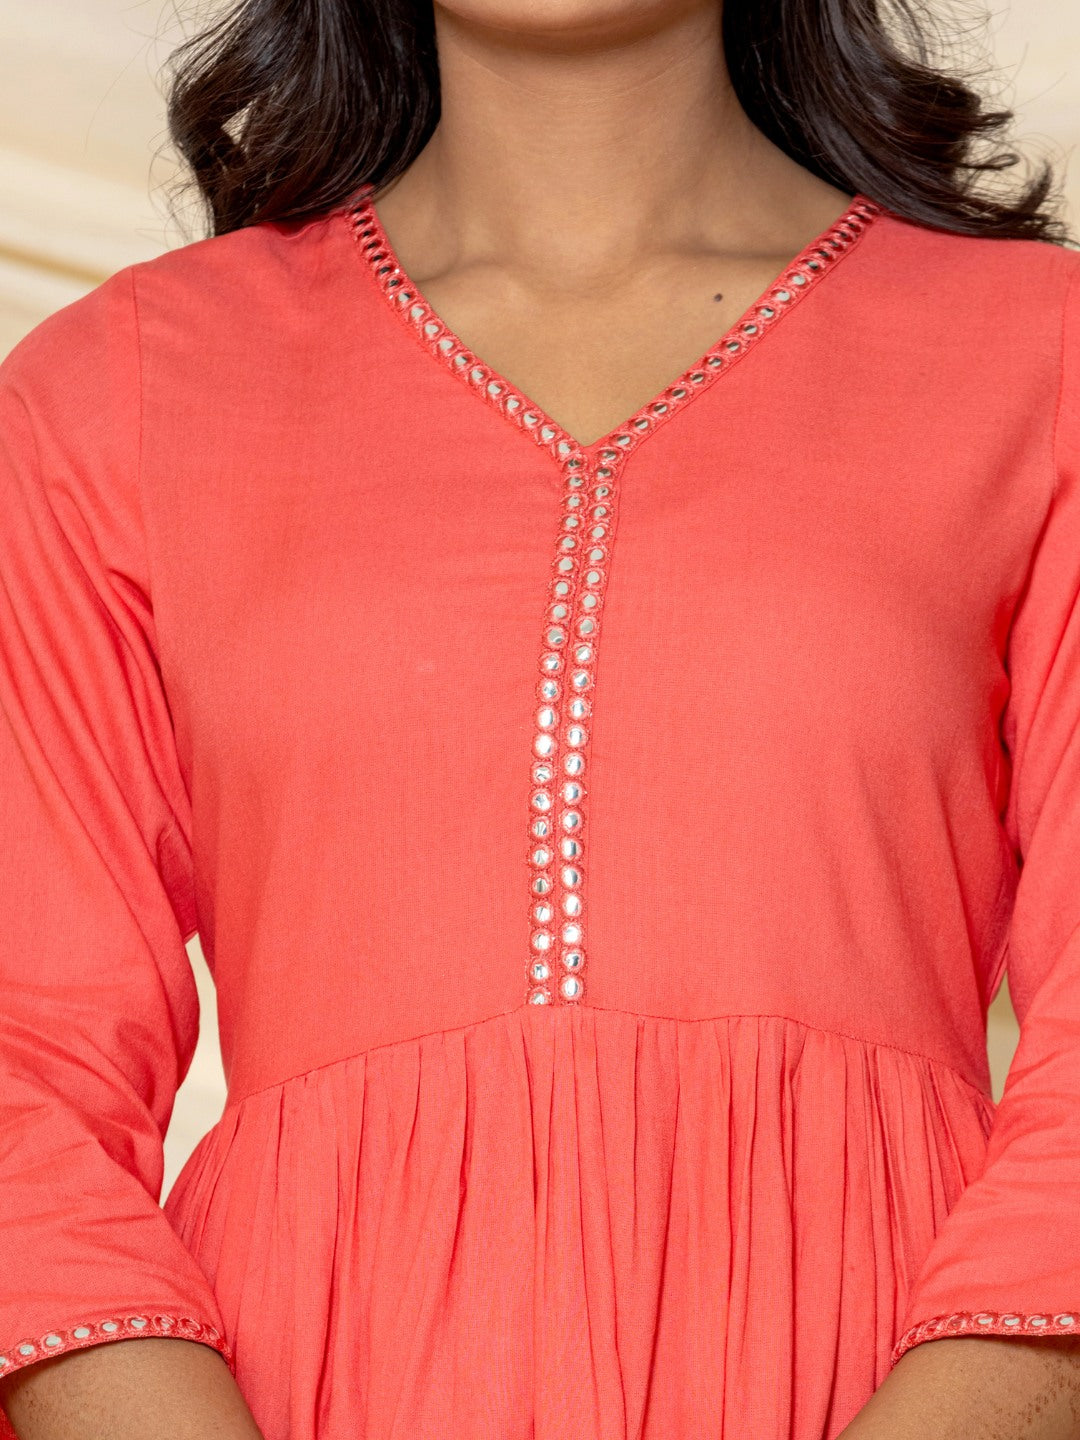 Solid Embroidered Peplum Top - Peach